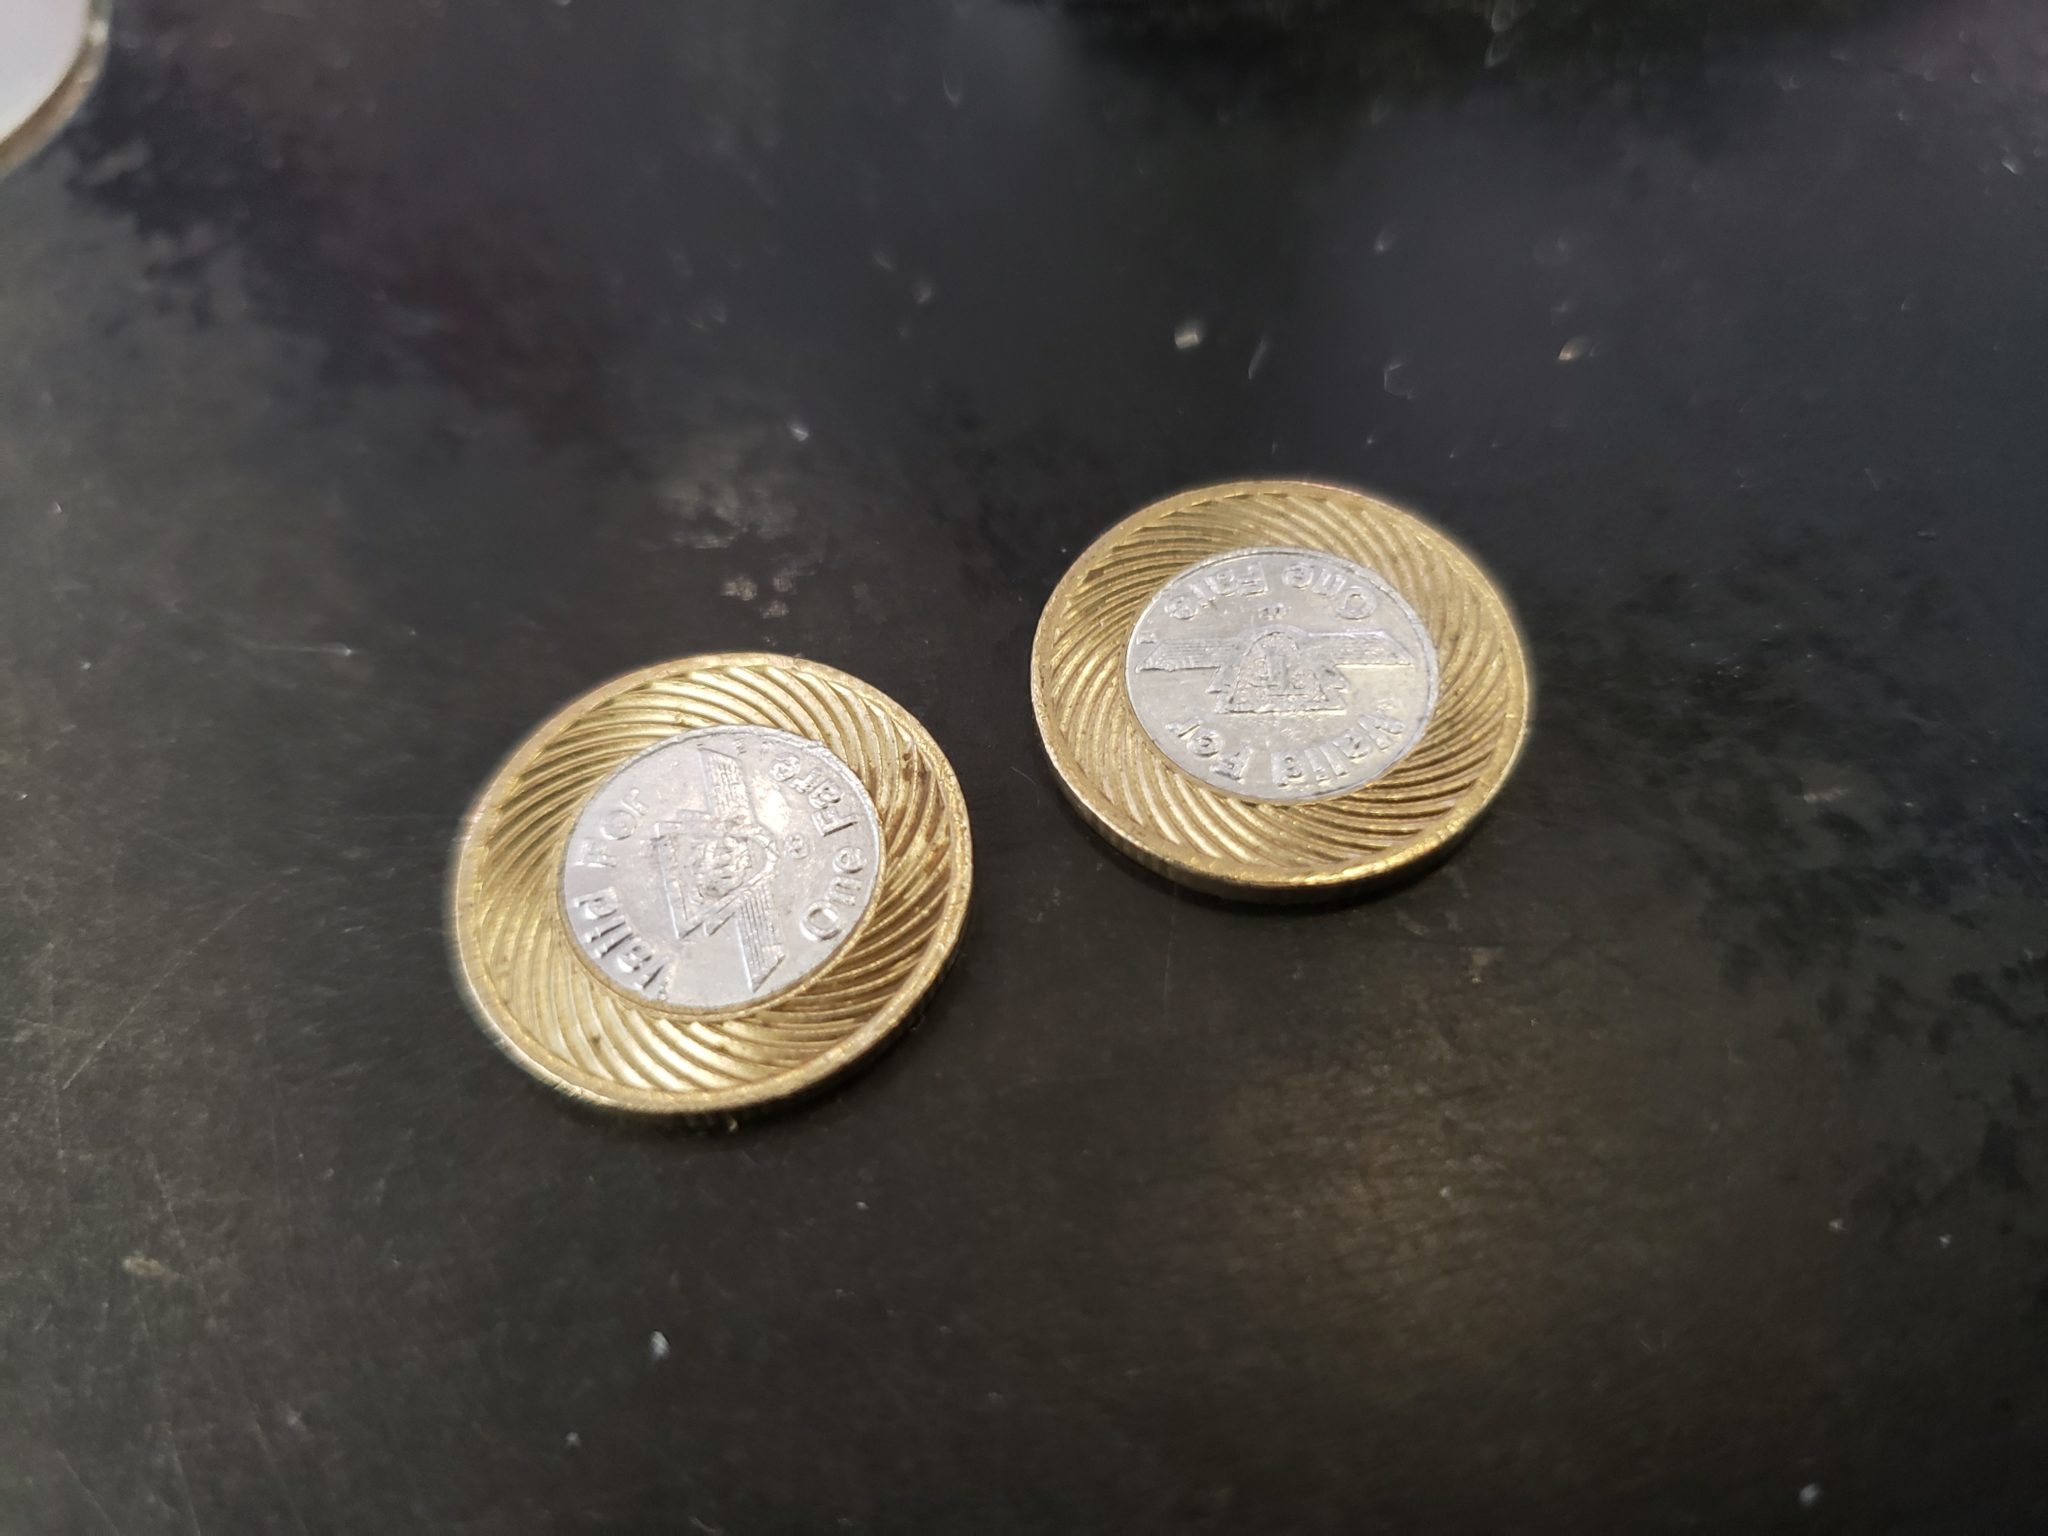 a pair of gold and silver coins